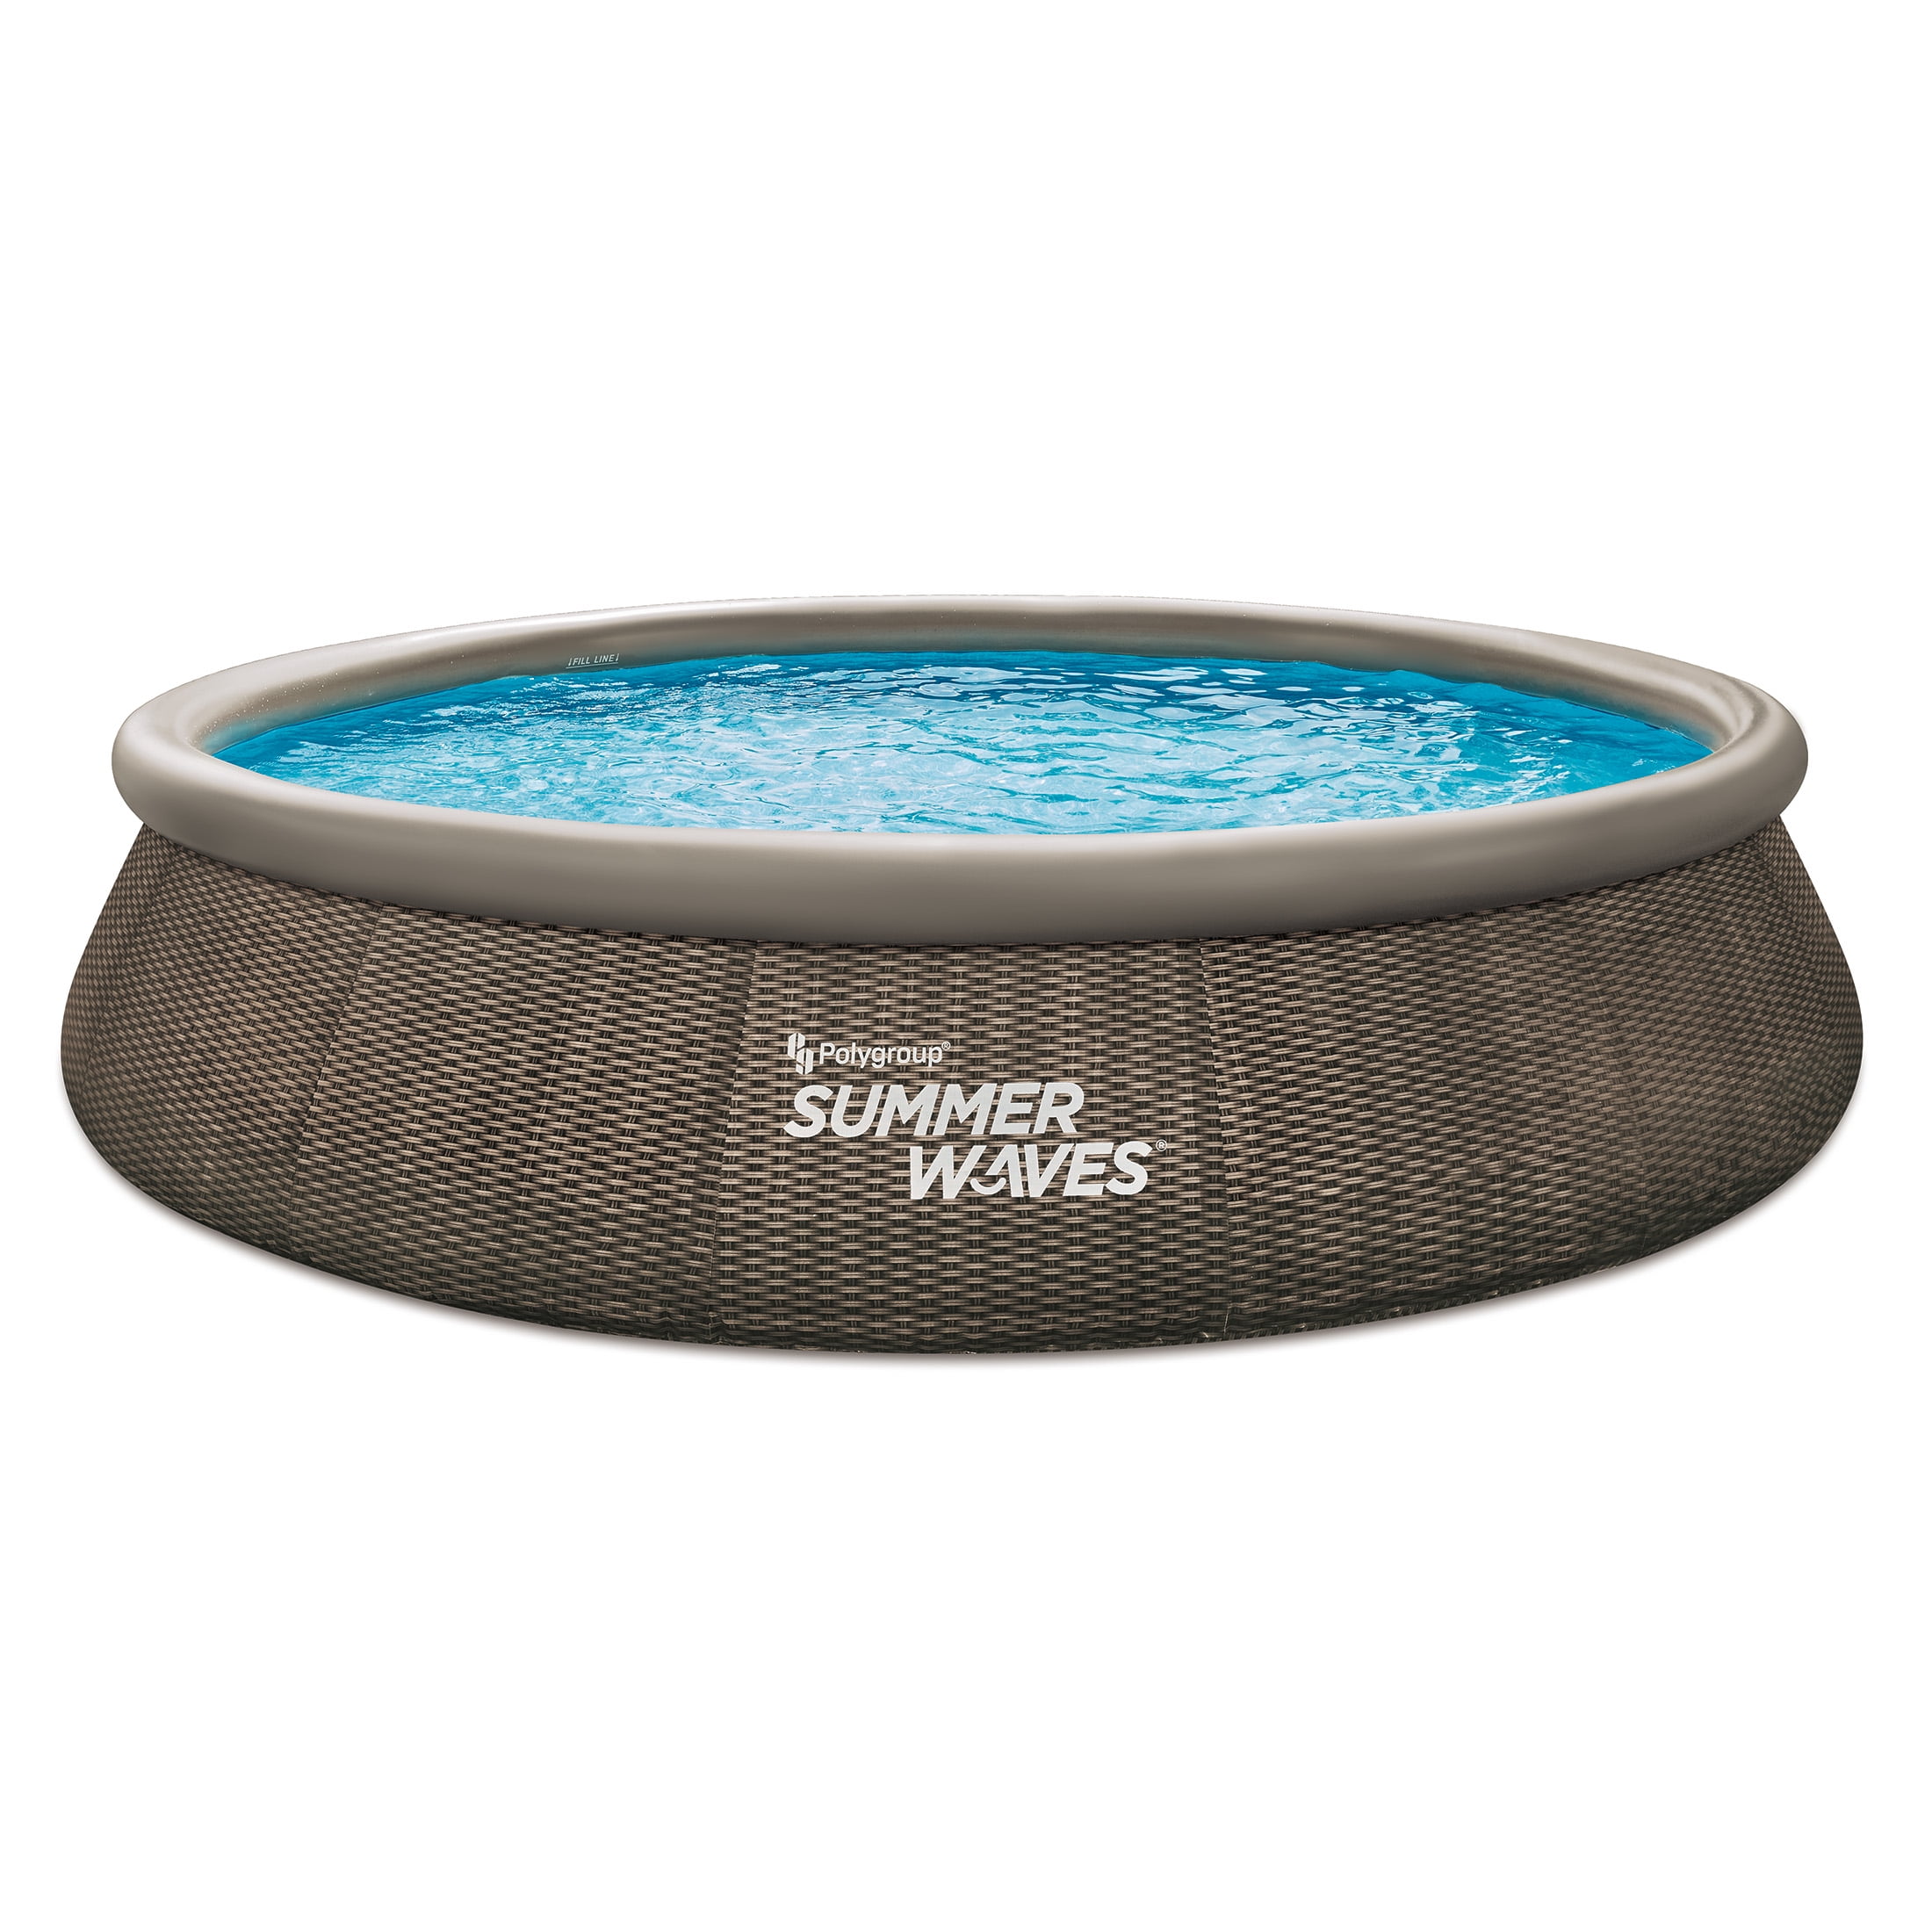 15' Summer Waves Double Rattan Quick Set Round Pool $88 + Free Shipping